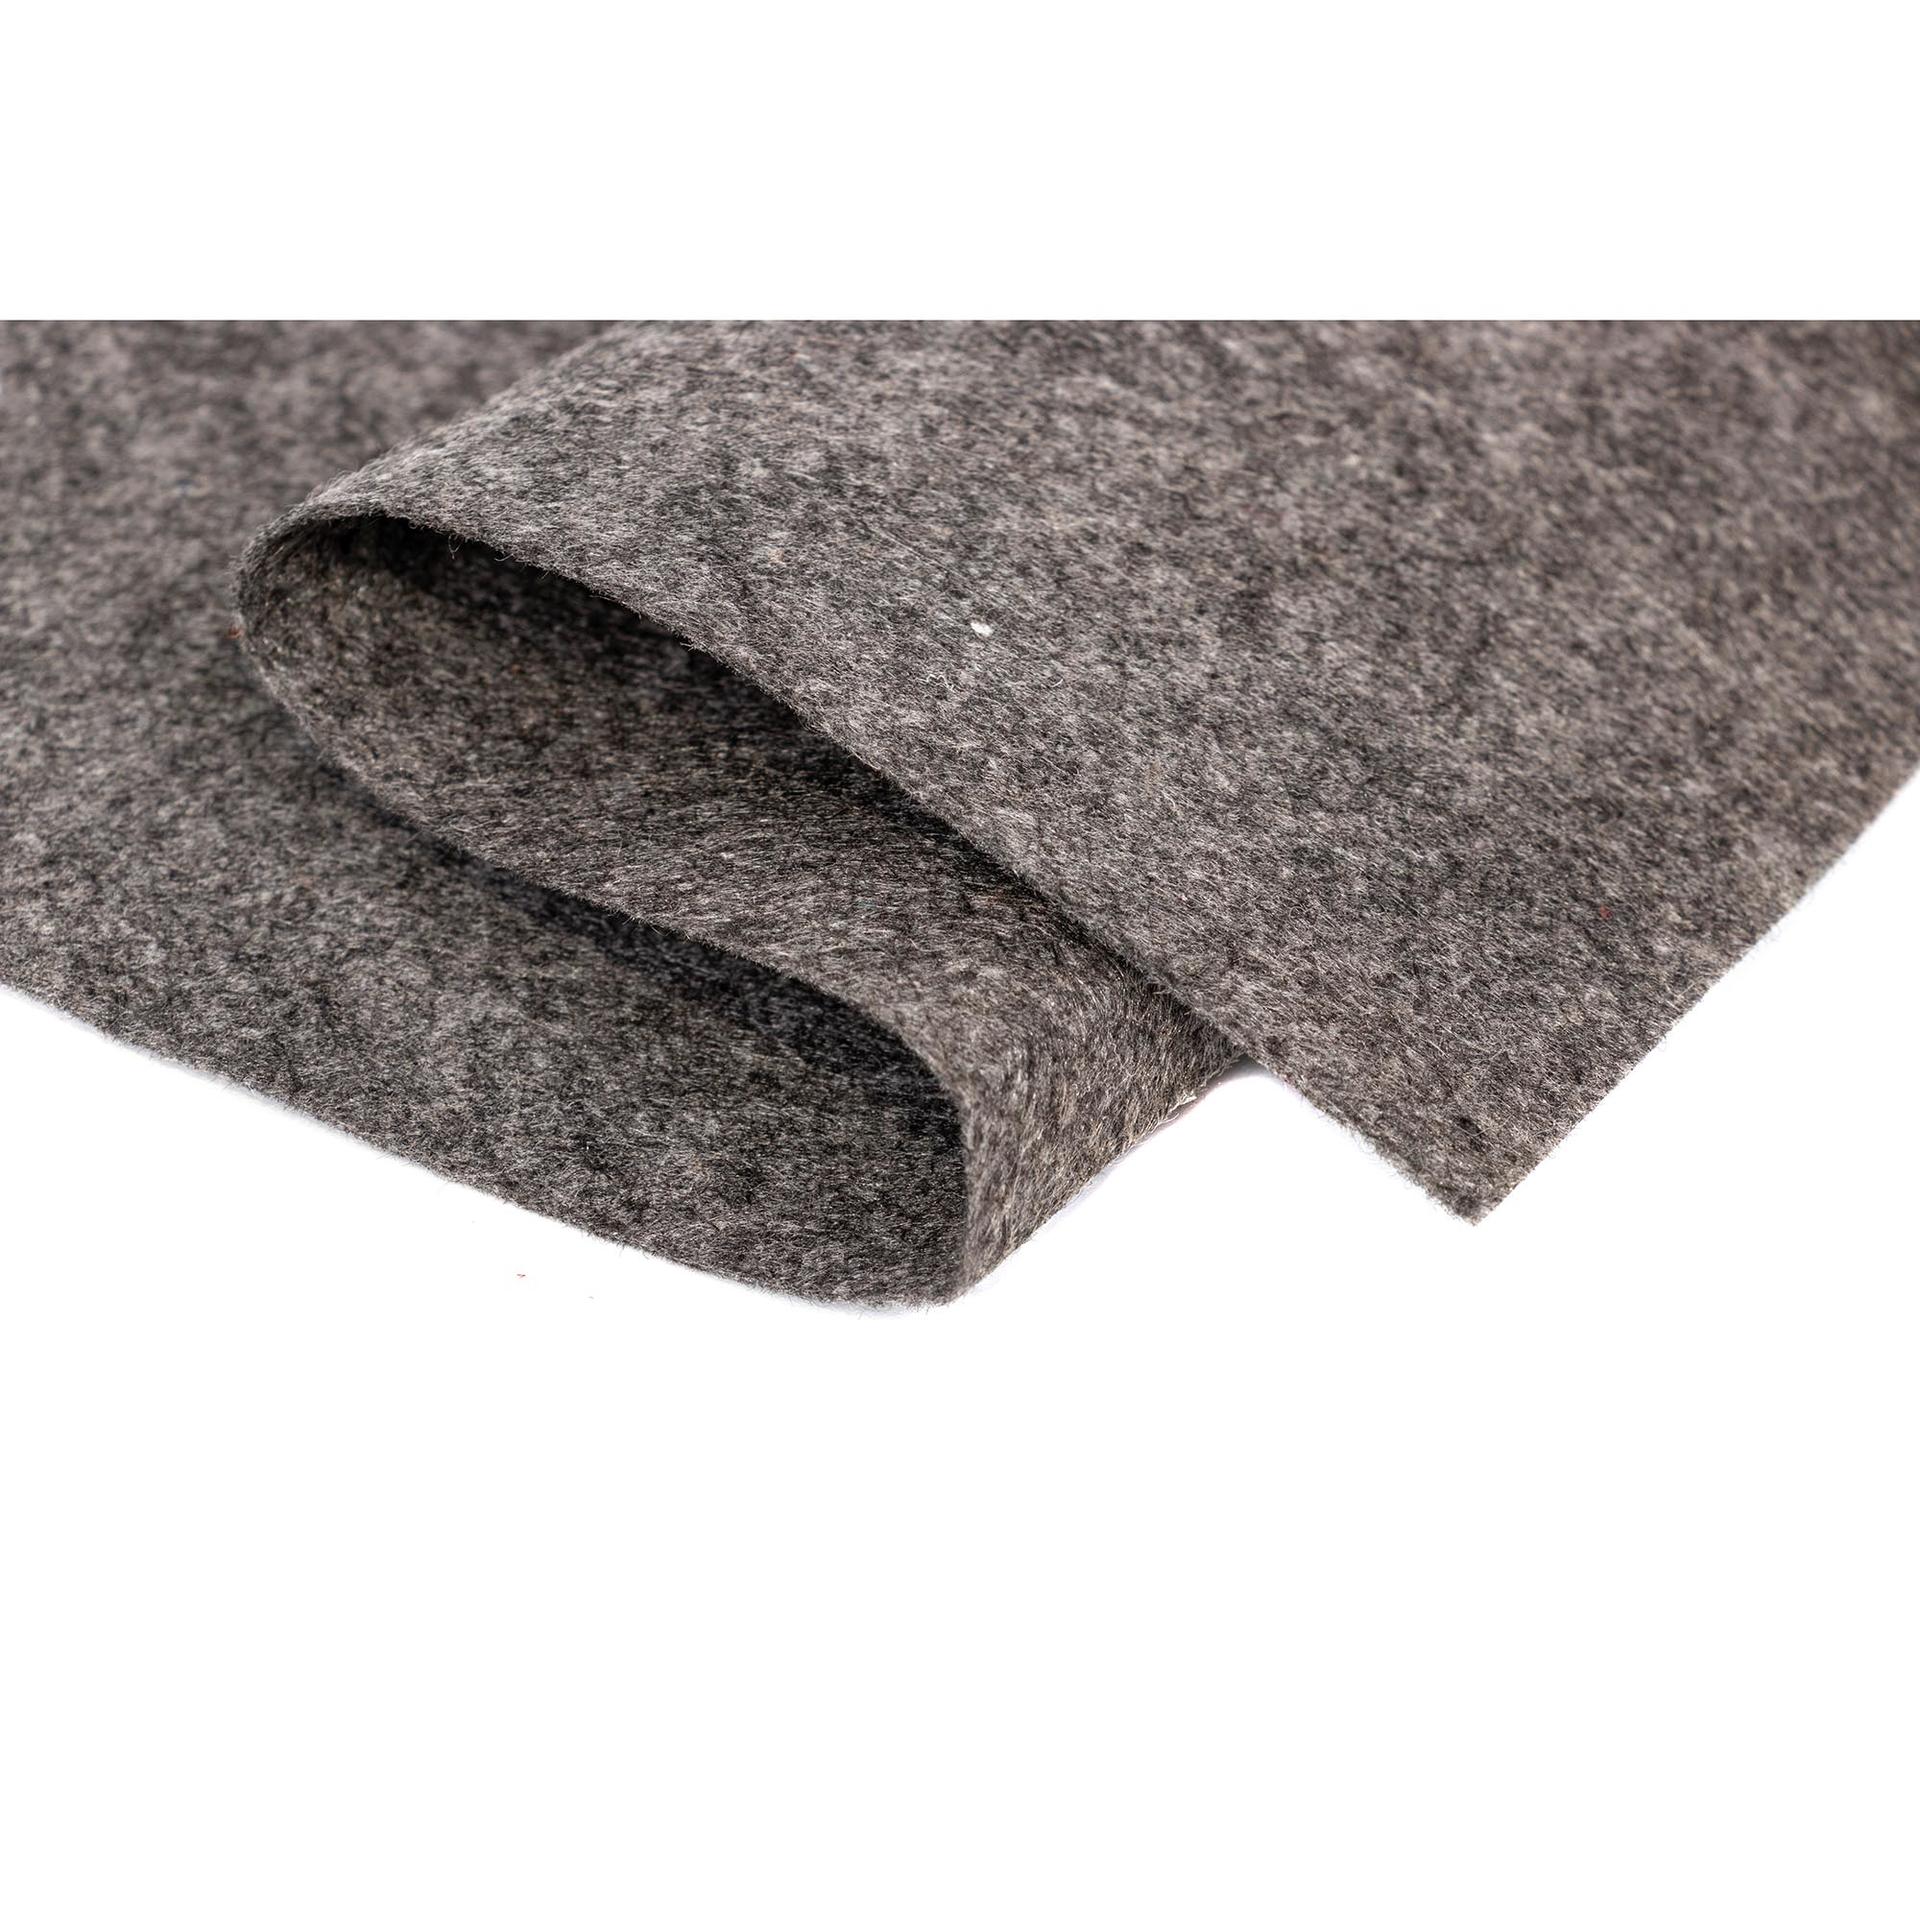 China Material Suppliers High Quality Geotextile Fabric Price Needle Punched Nonwoven Fabric